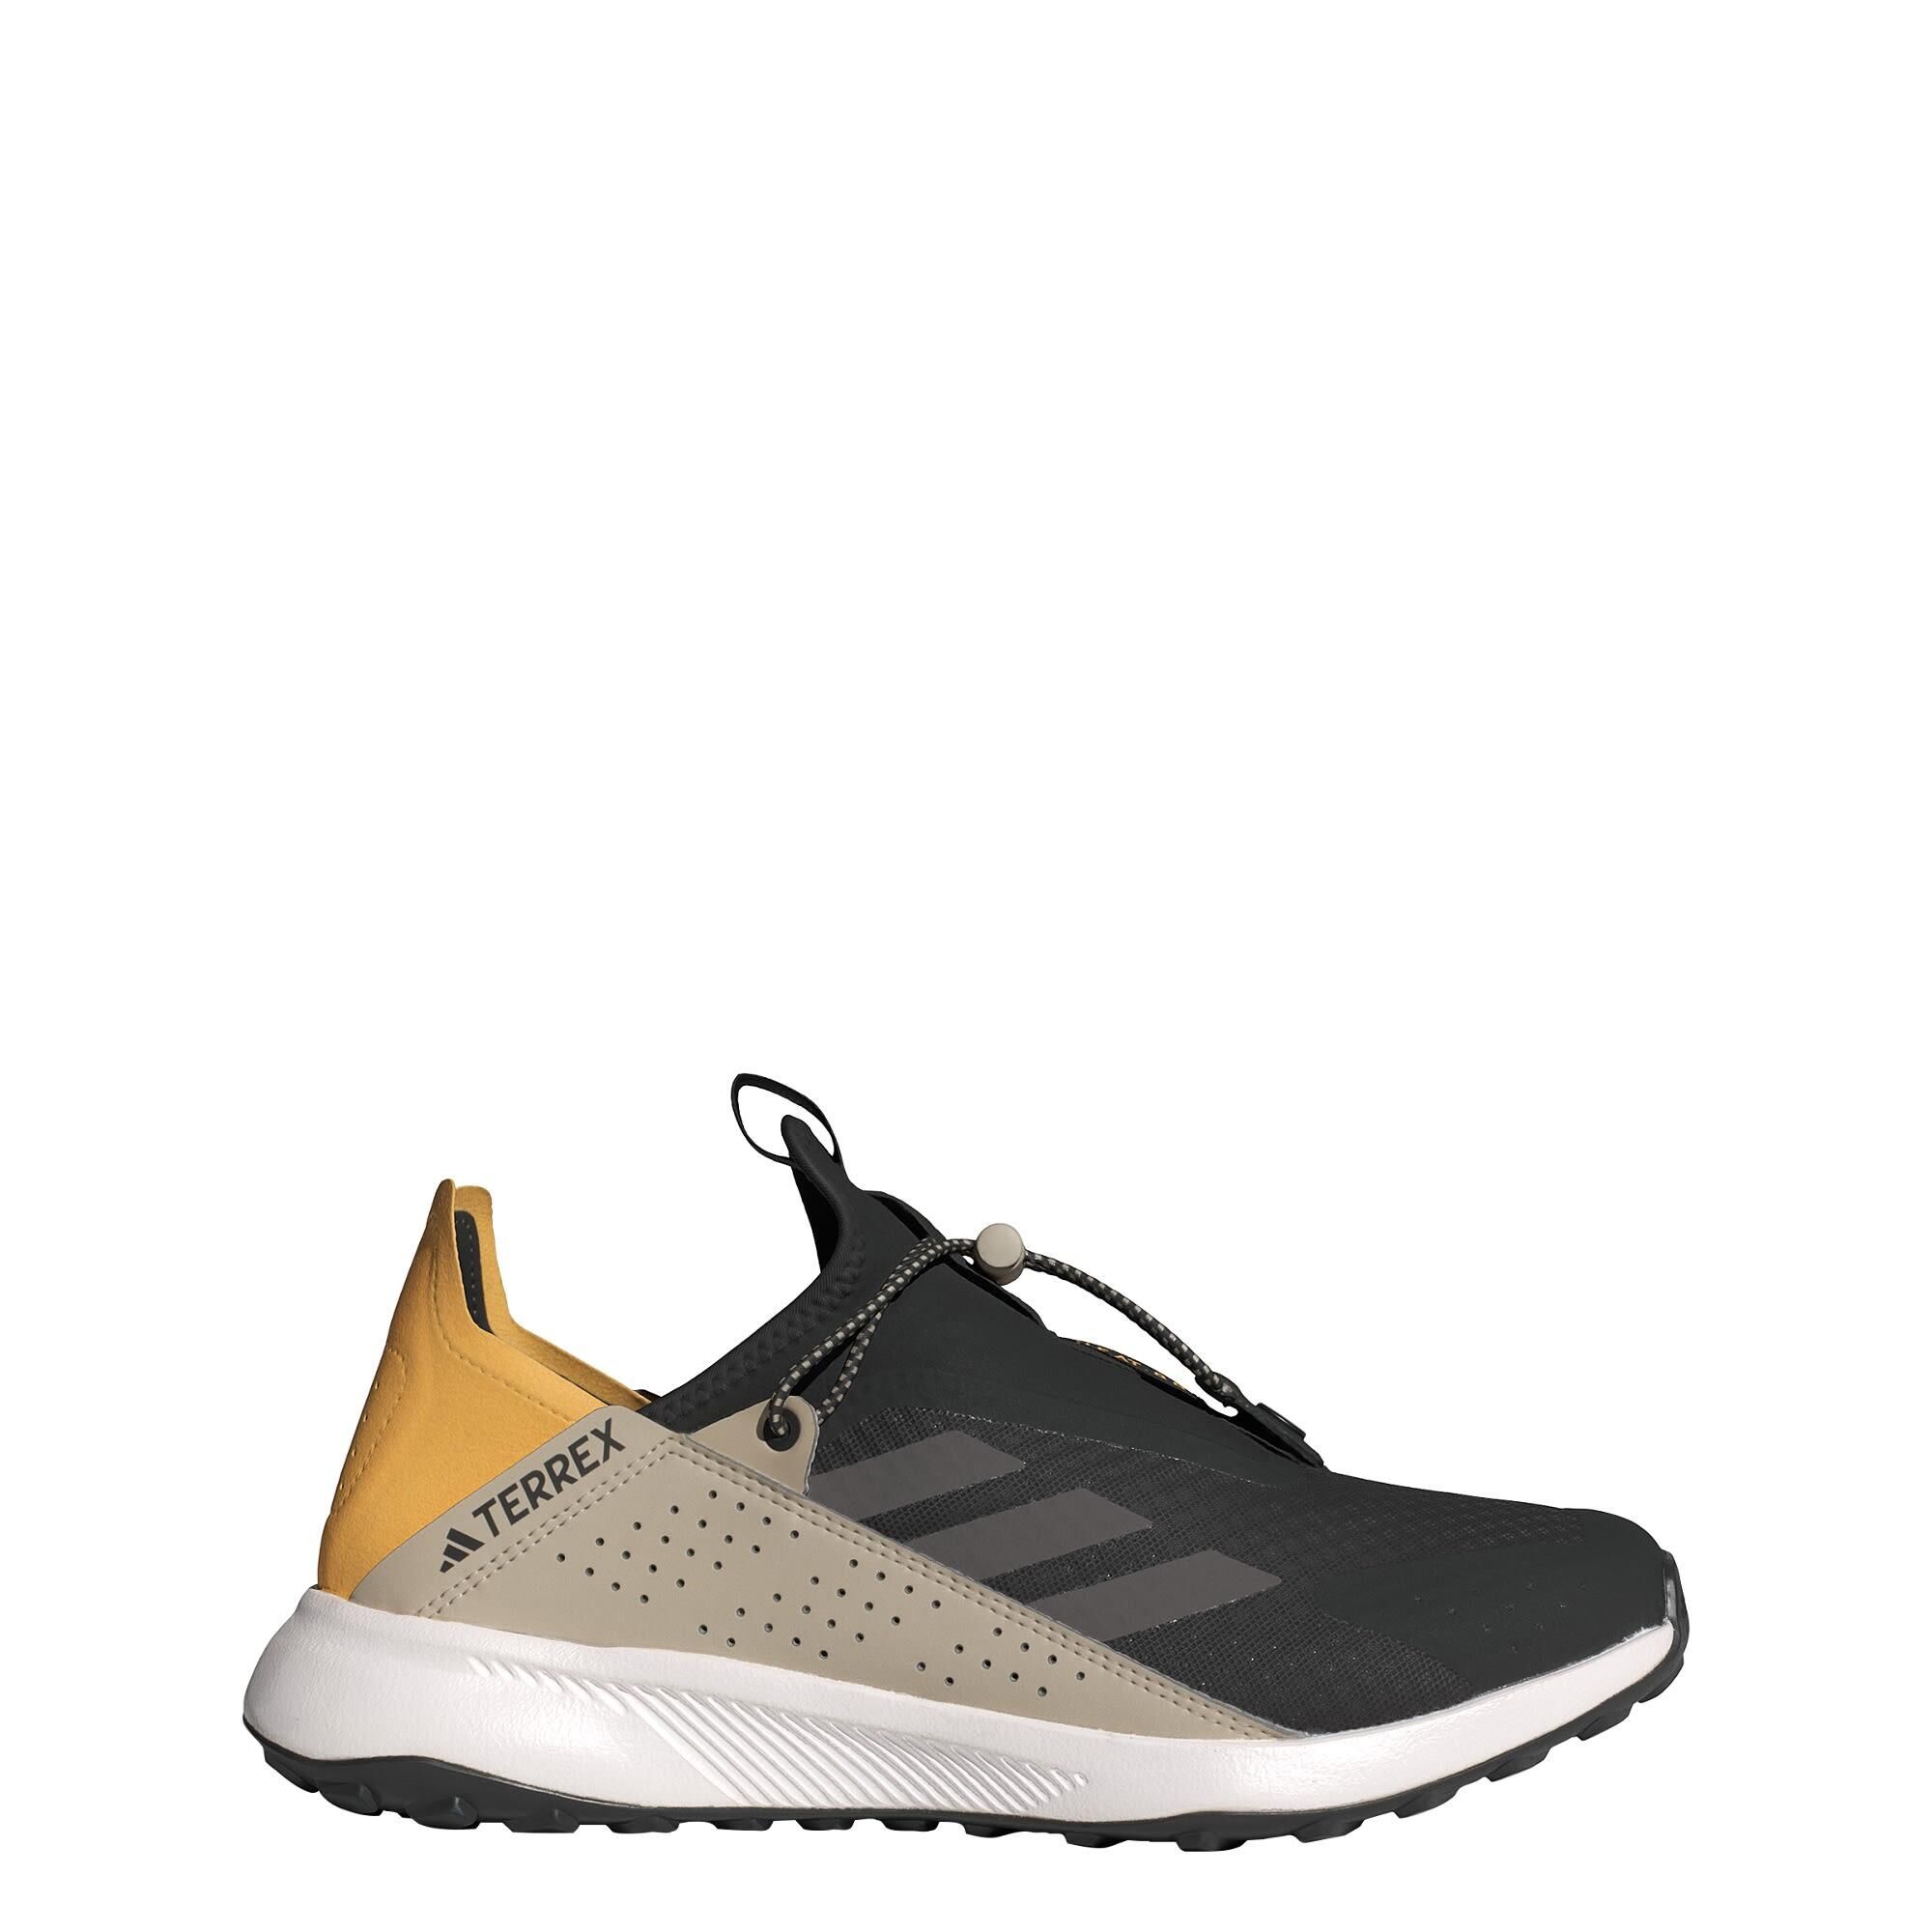 ADIDAS Terrex Voyager 21 Slip-On HEAT.RDY Travel Shoes